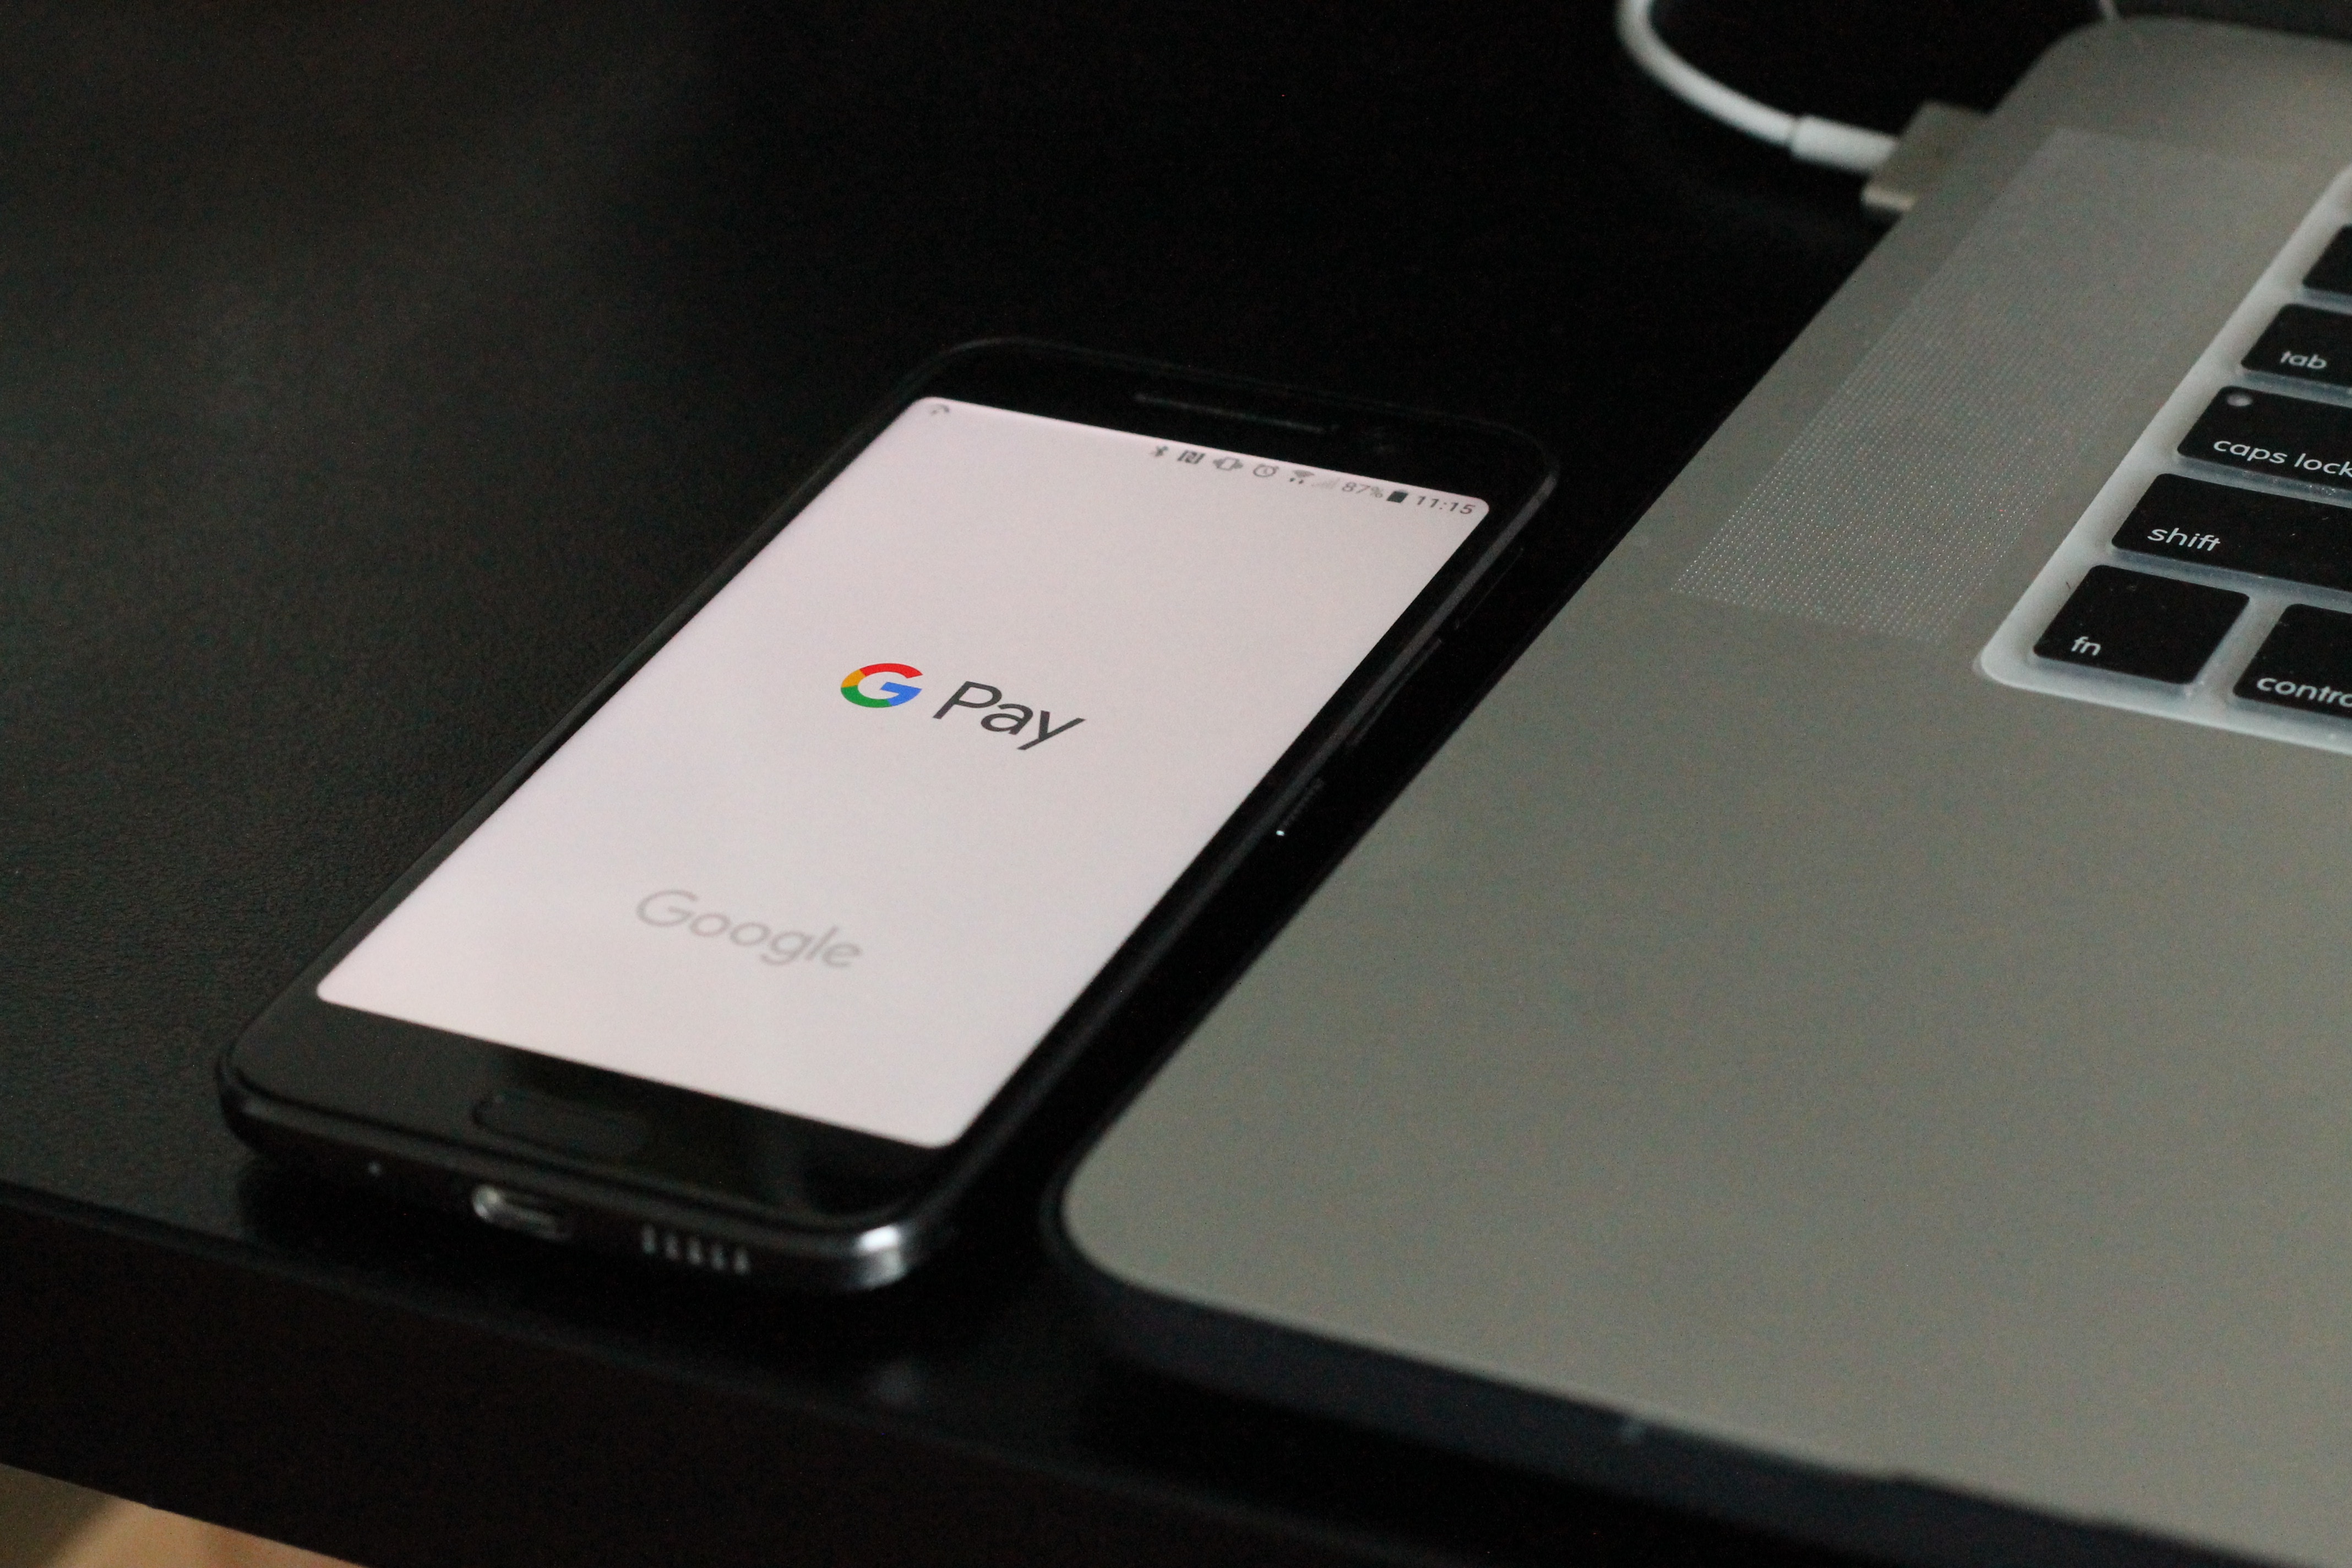 Google Pay in India adds strategic features to keep competition away